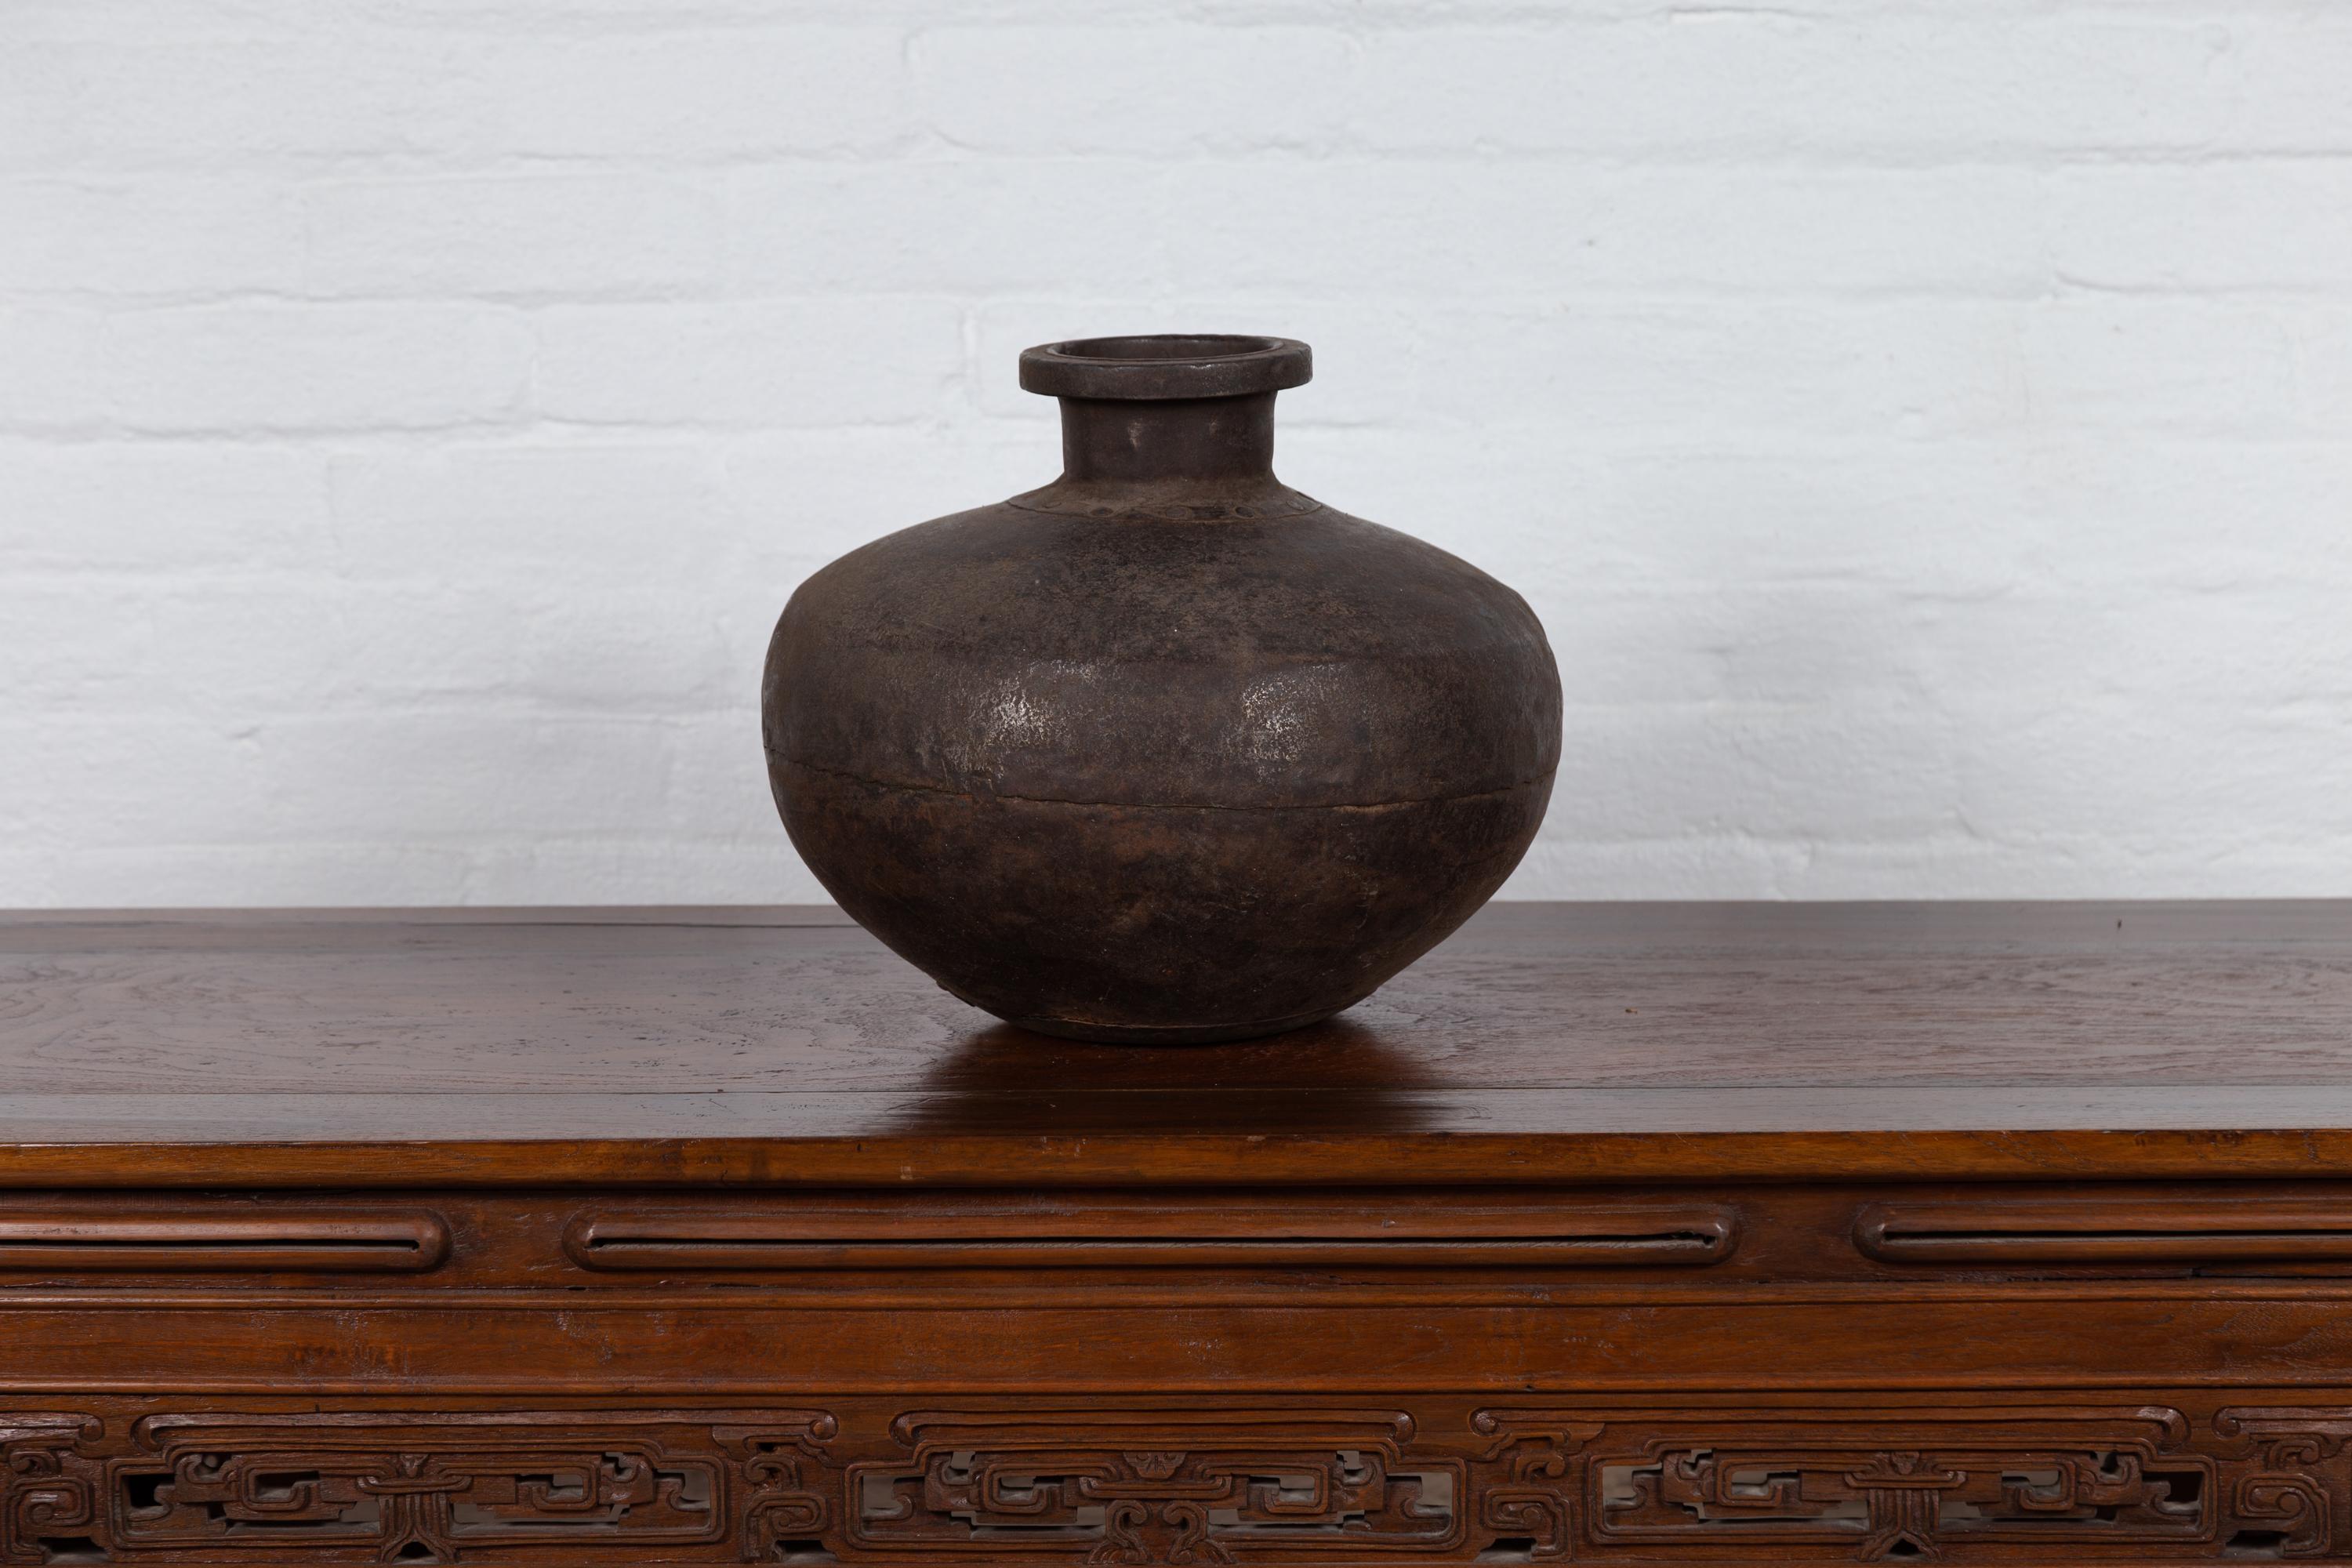 An antique Indian metal water jar from the 19th century, with large belly, slender neck and large lip. Born in India during the 19th century, this metal water jar charms our eyes with its generous Silhouette and nicely weathered patina. Presenting a